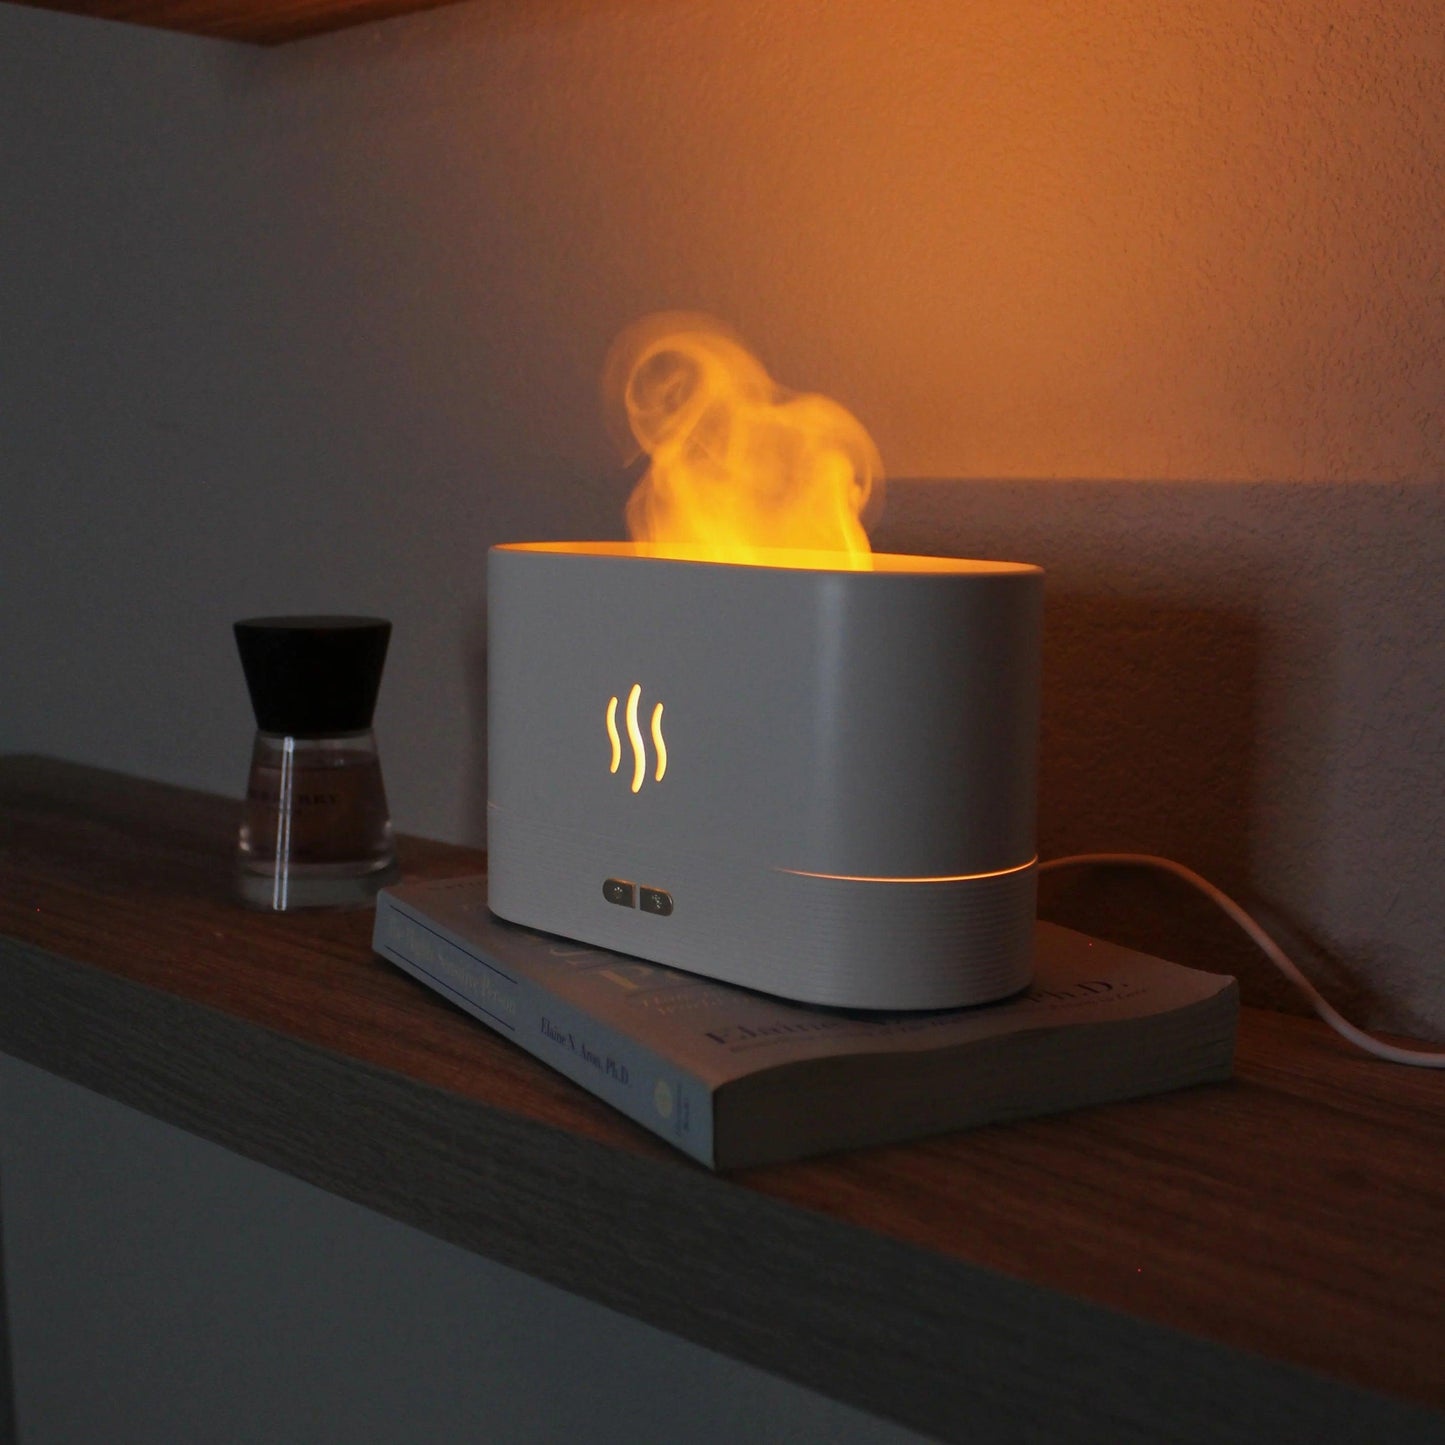 FlameWave Humidifier - Top Health